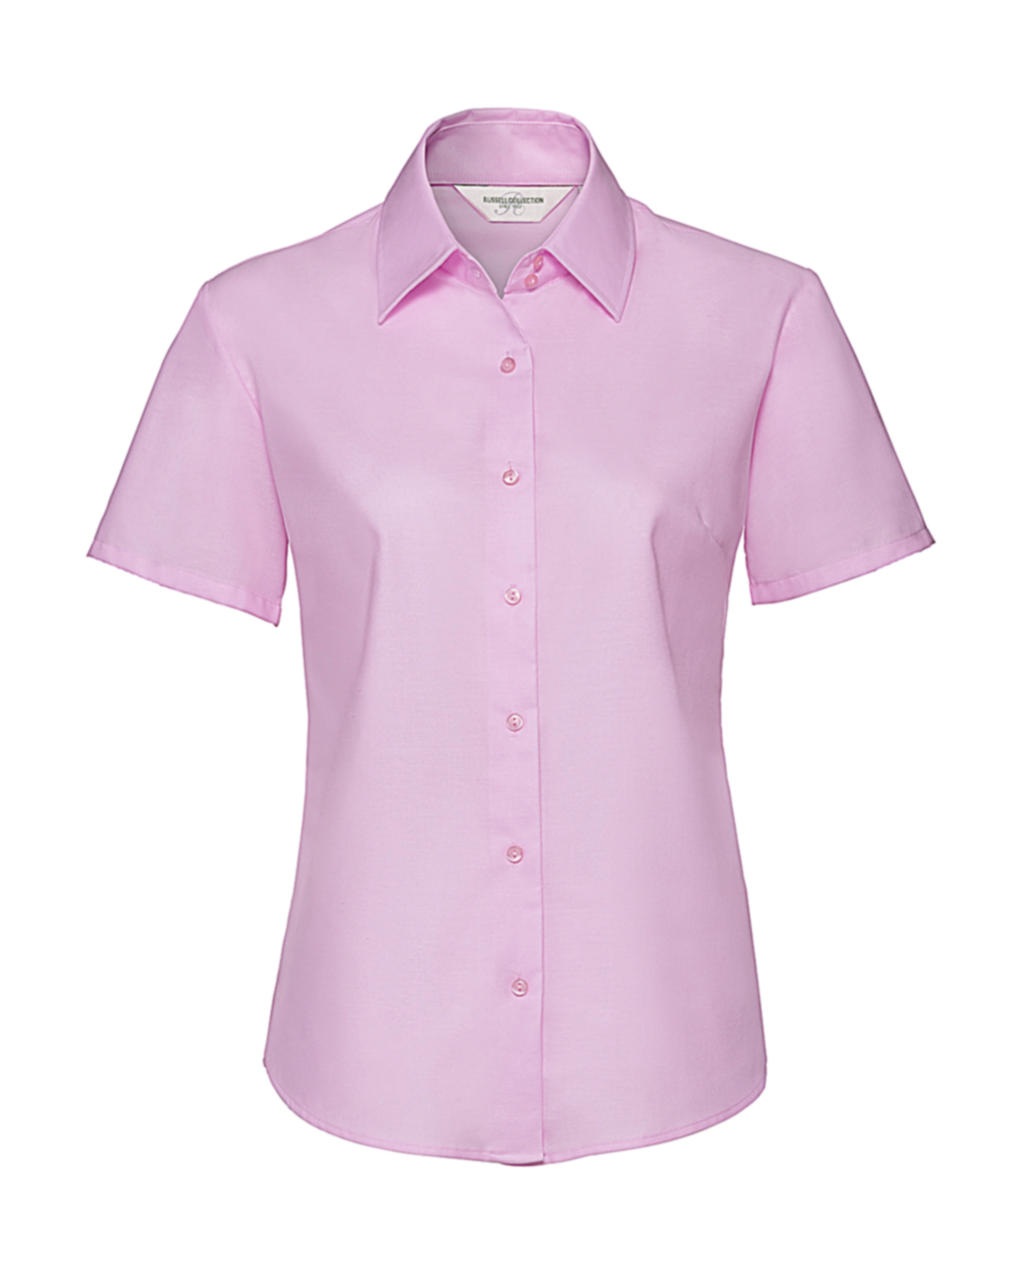  Ladies Classic Oxford Shirt in Farbe Classic Pink